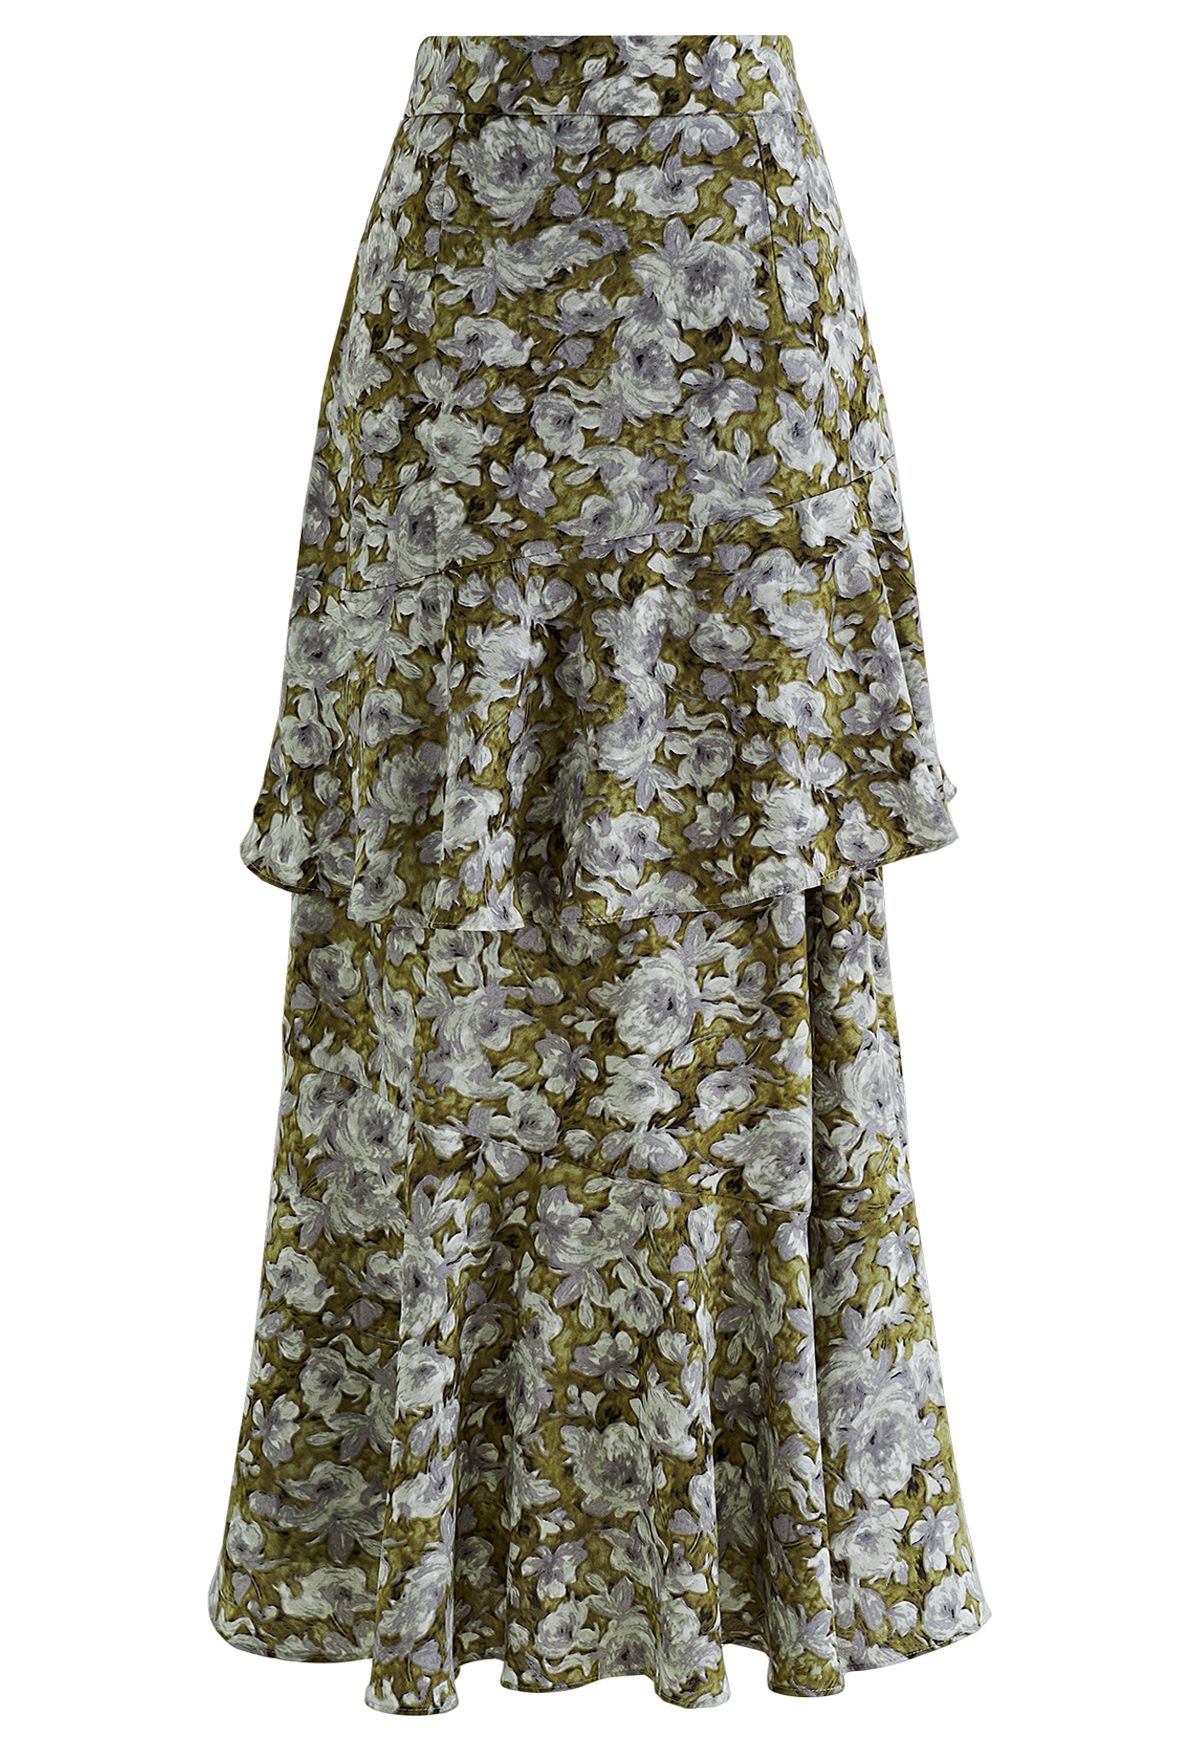 Floral Oil Painting Ruffle Maxi Skirt in Green